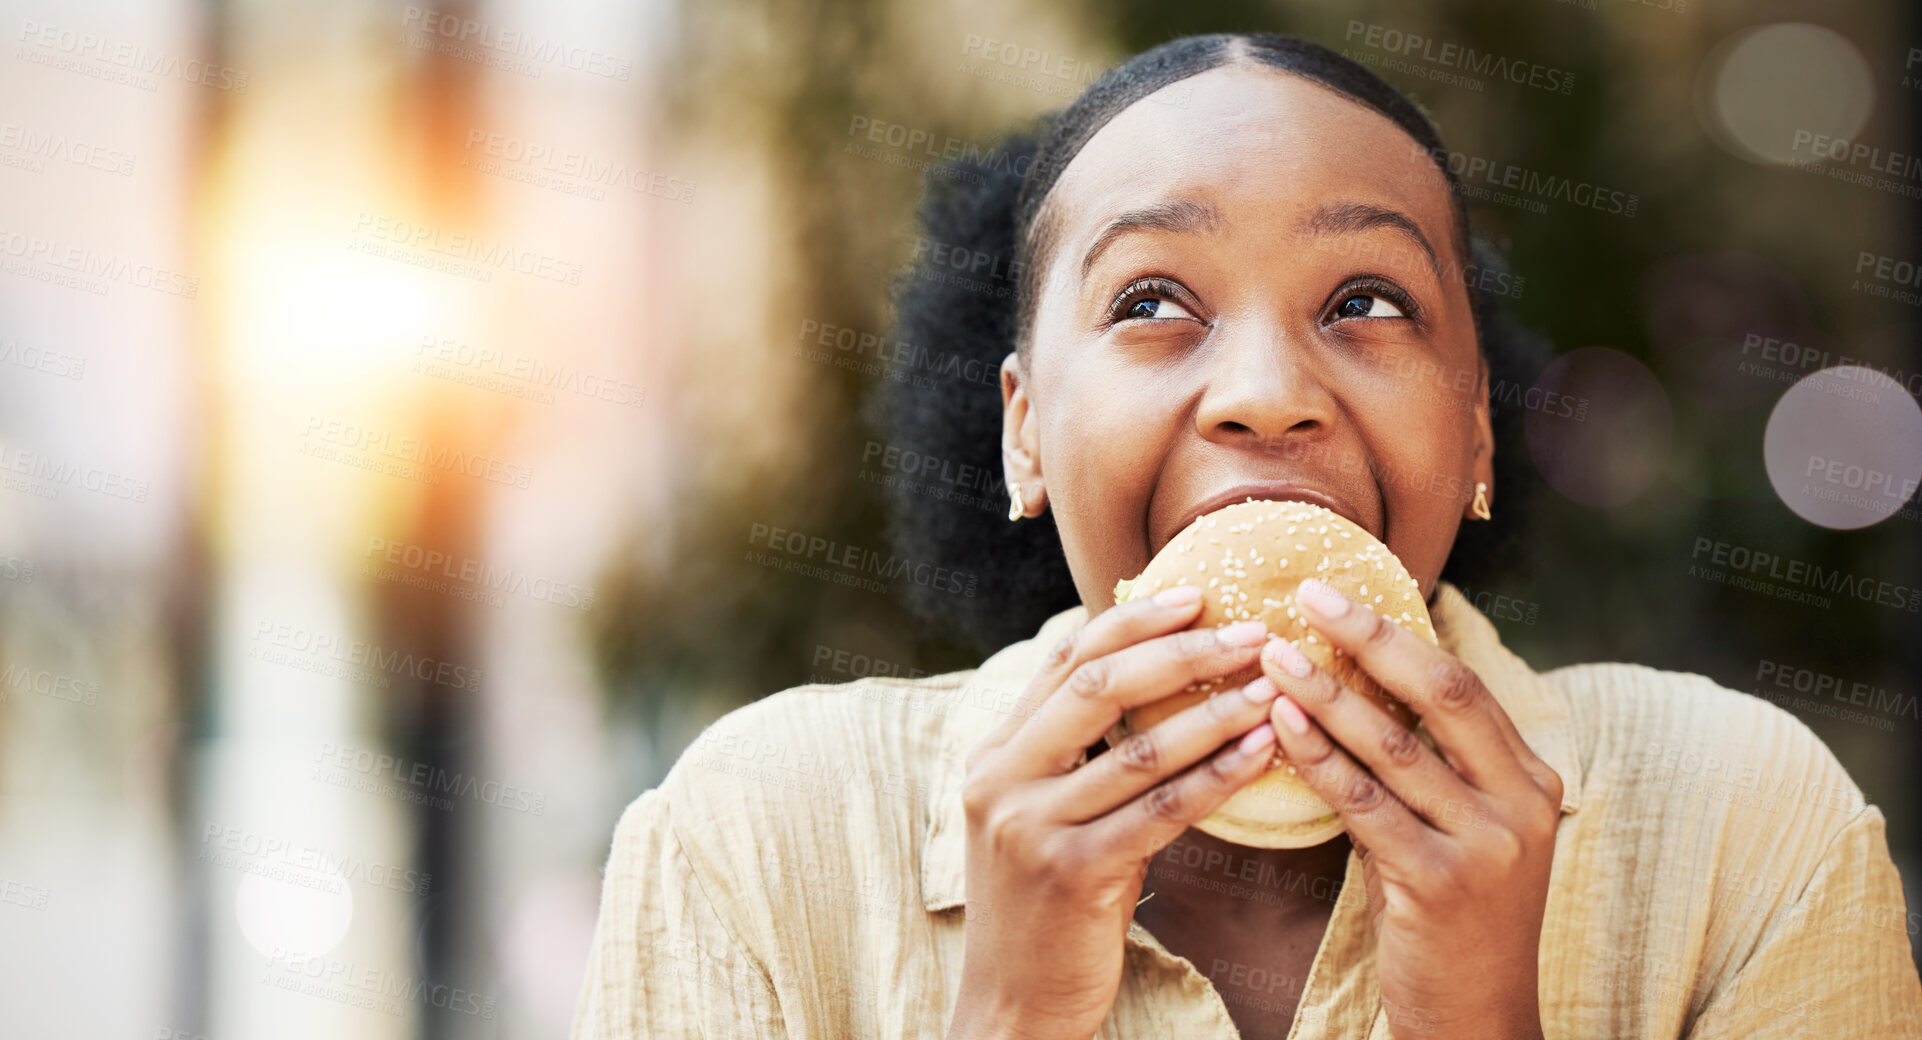 Buy stock photo Mockup, fast food and black woman eating a burger in an outdoor restaurant as a lunch meal craving deal. Breakfast, sandwich and young female person or customer enjoying a tasty unhealthy snack